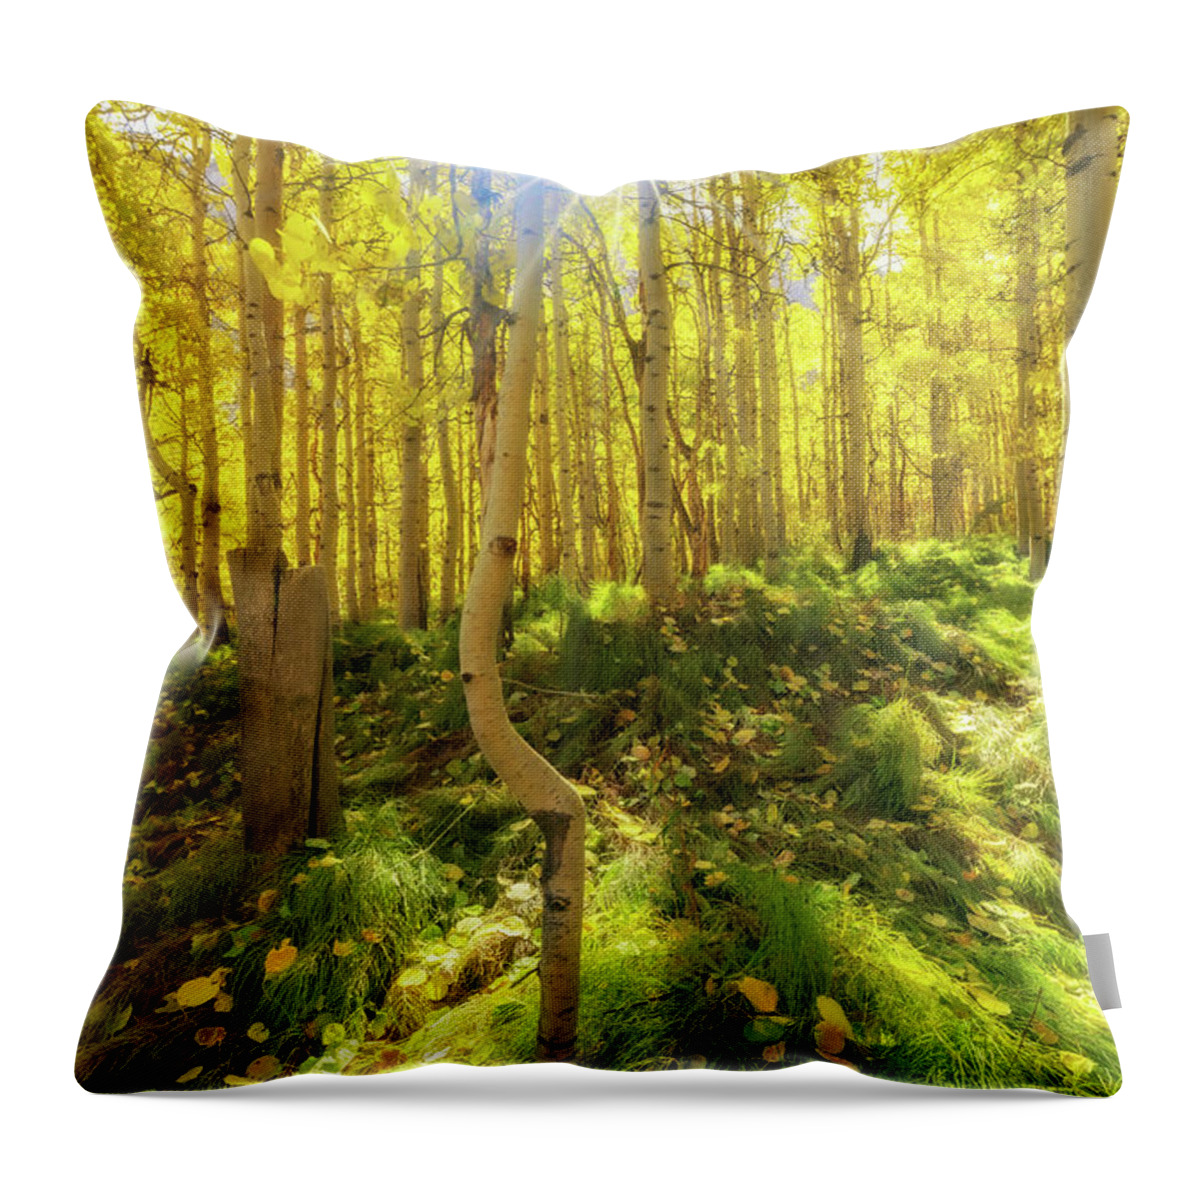 Fall Colors Throw Pillow featuring the photograph Fall Vibes by Tassanee Angiolillo